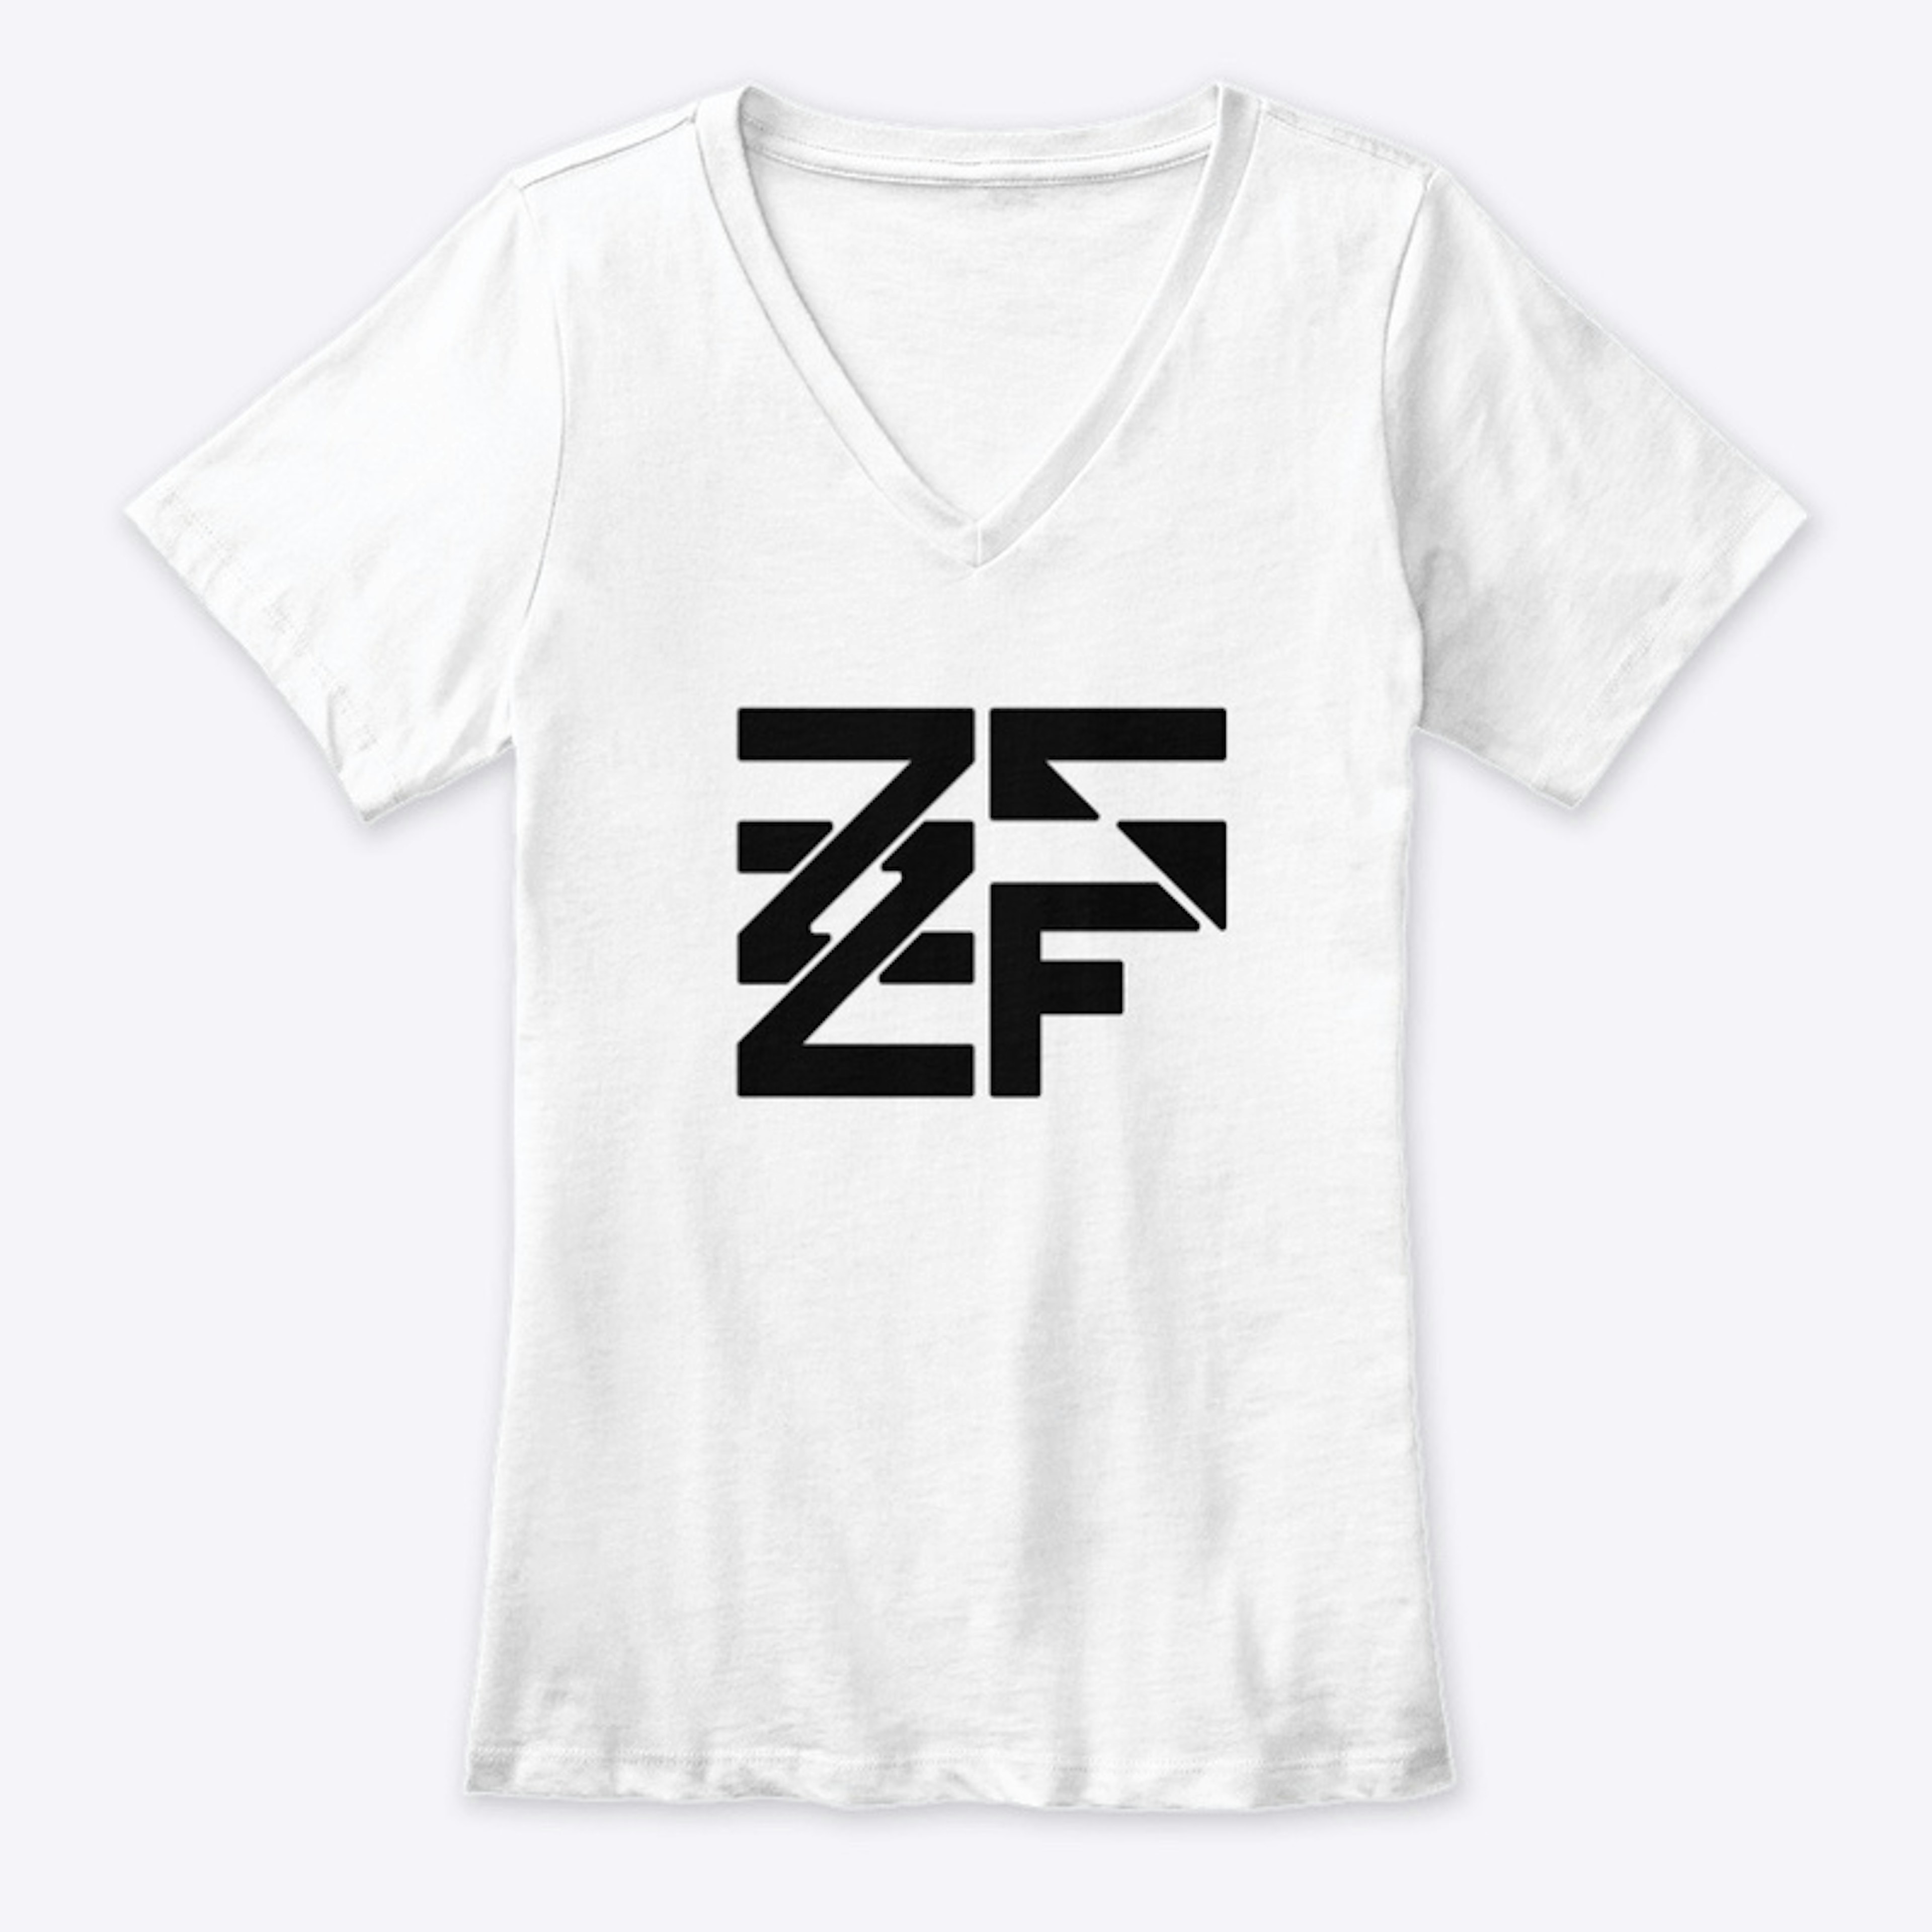 The ZSZF Brand